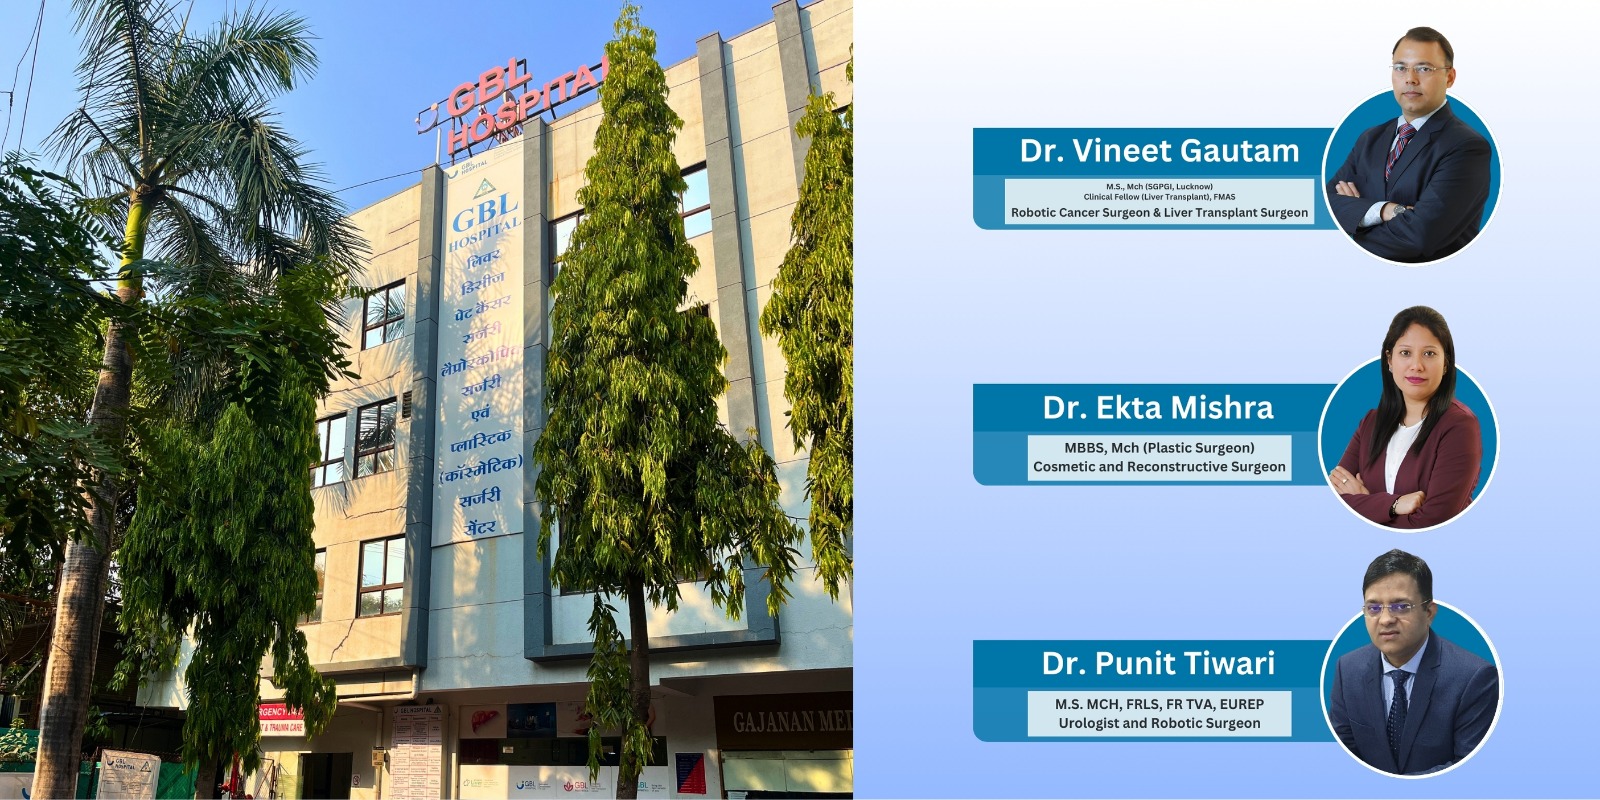 GBL Hospital – Indore Organizing Free Consultation Camp on Robotic Surgeries and Cosmetic Procedures